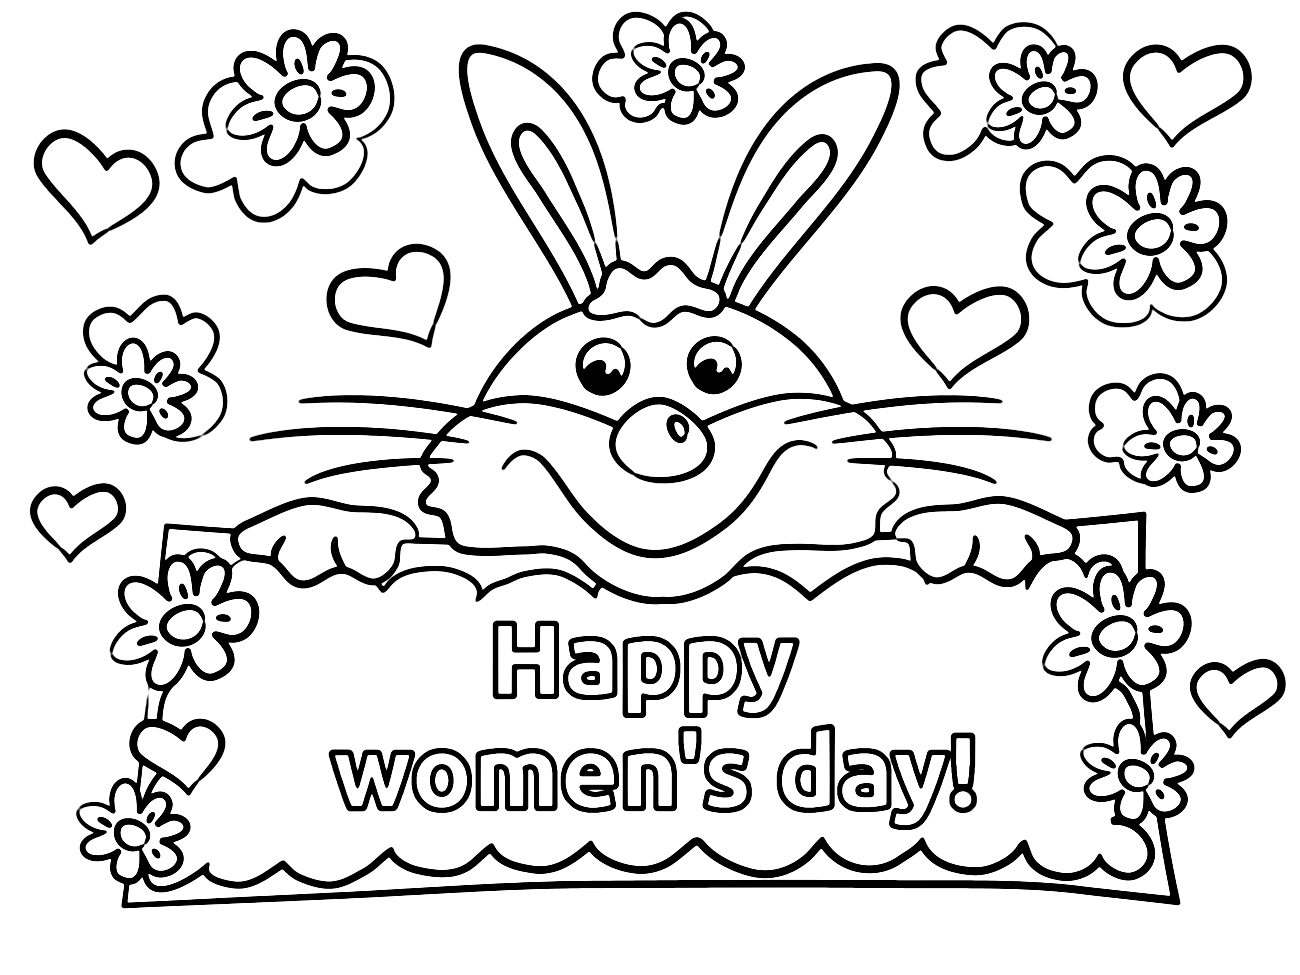 Bunny card of Womens Day from Women's Day 2024